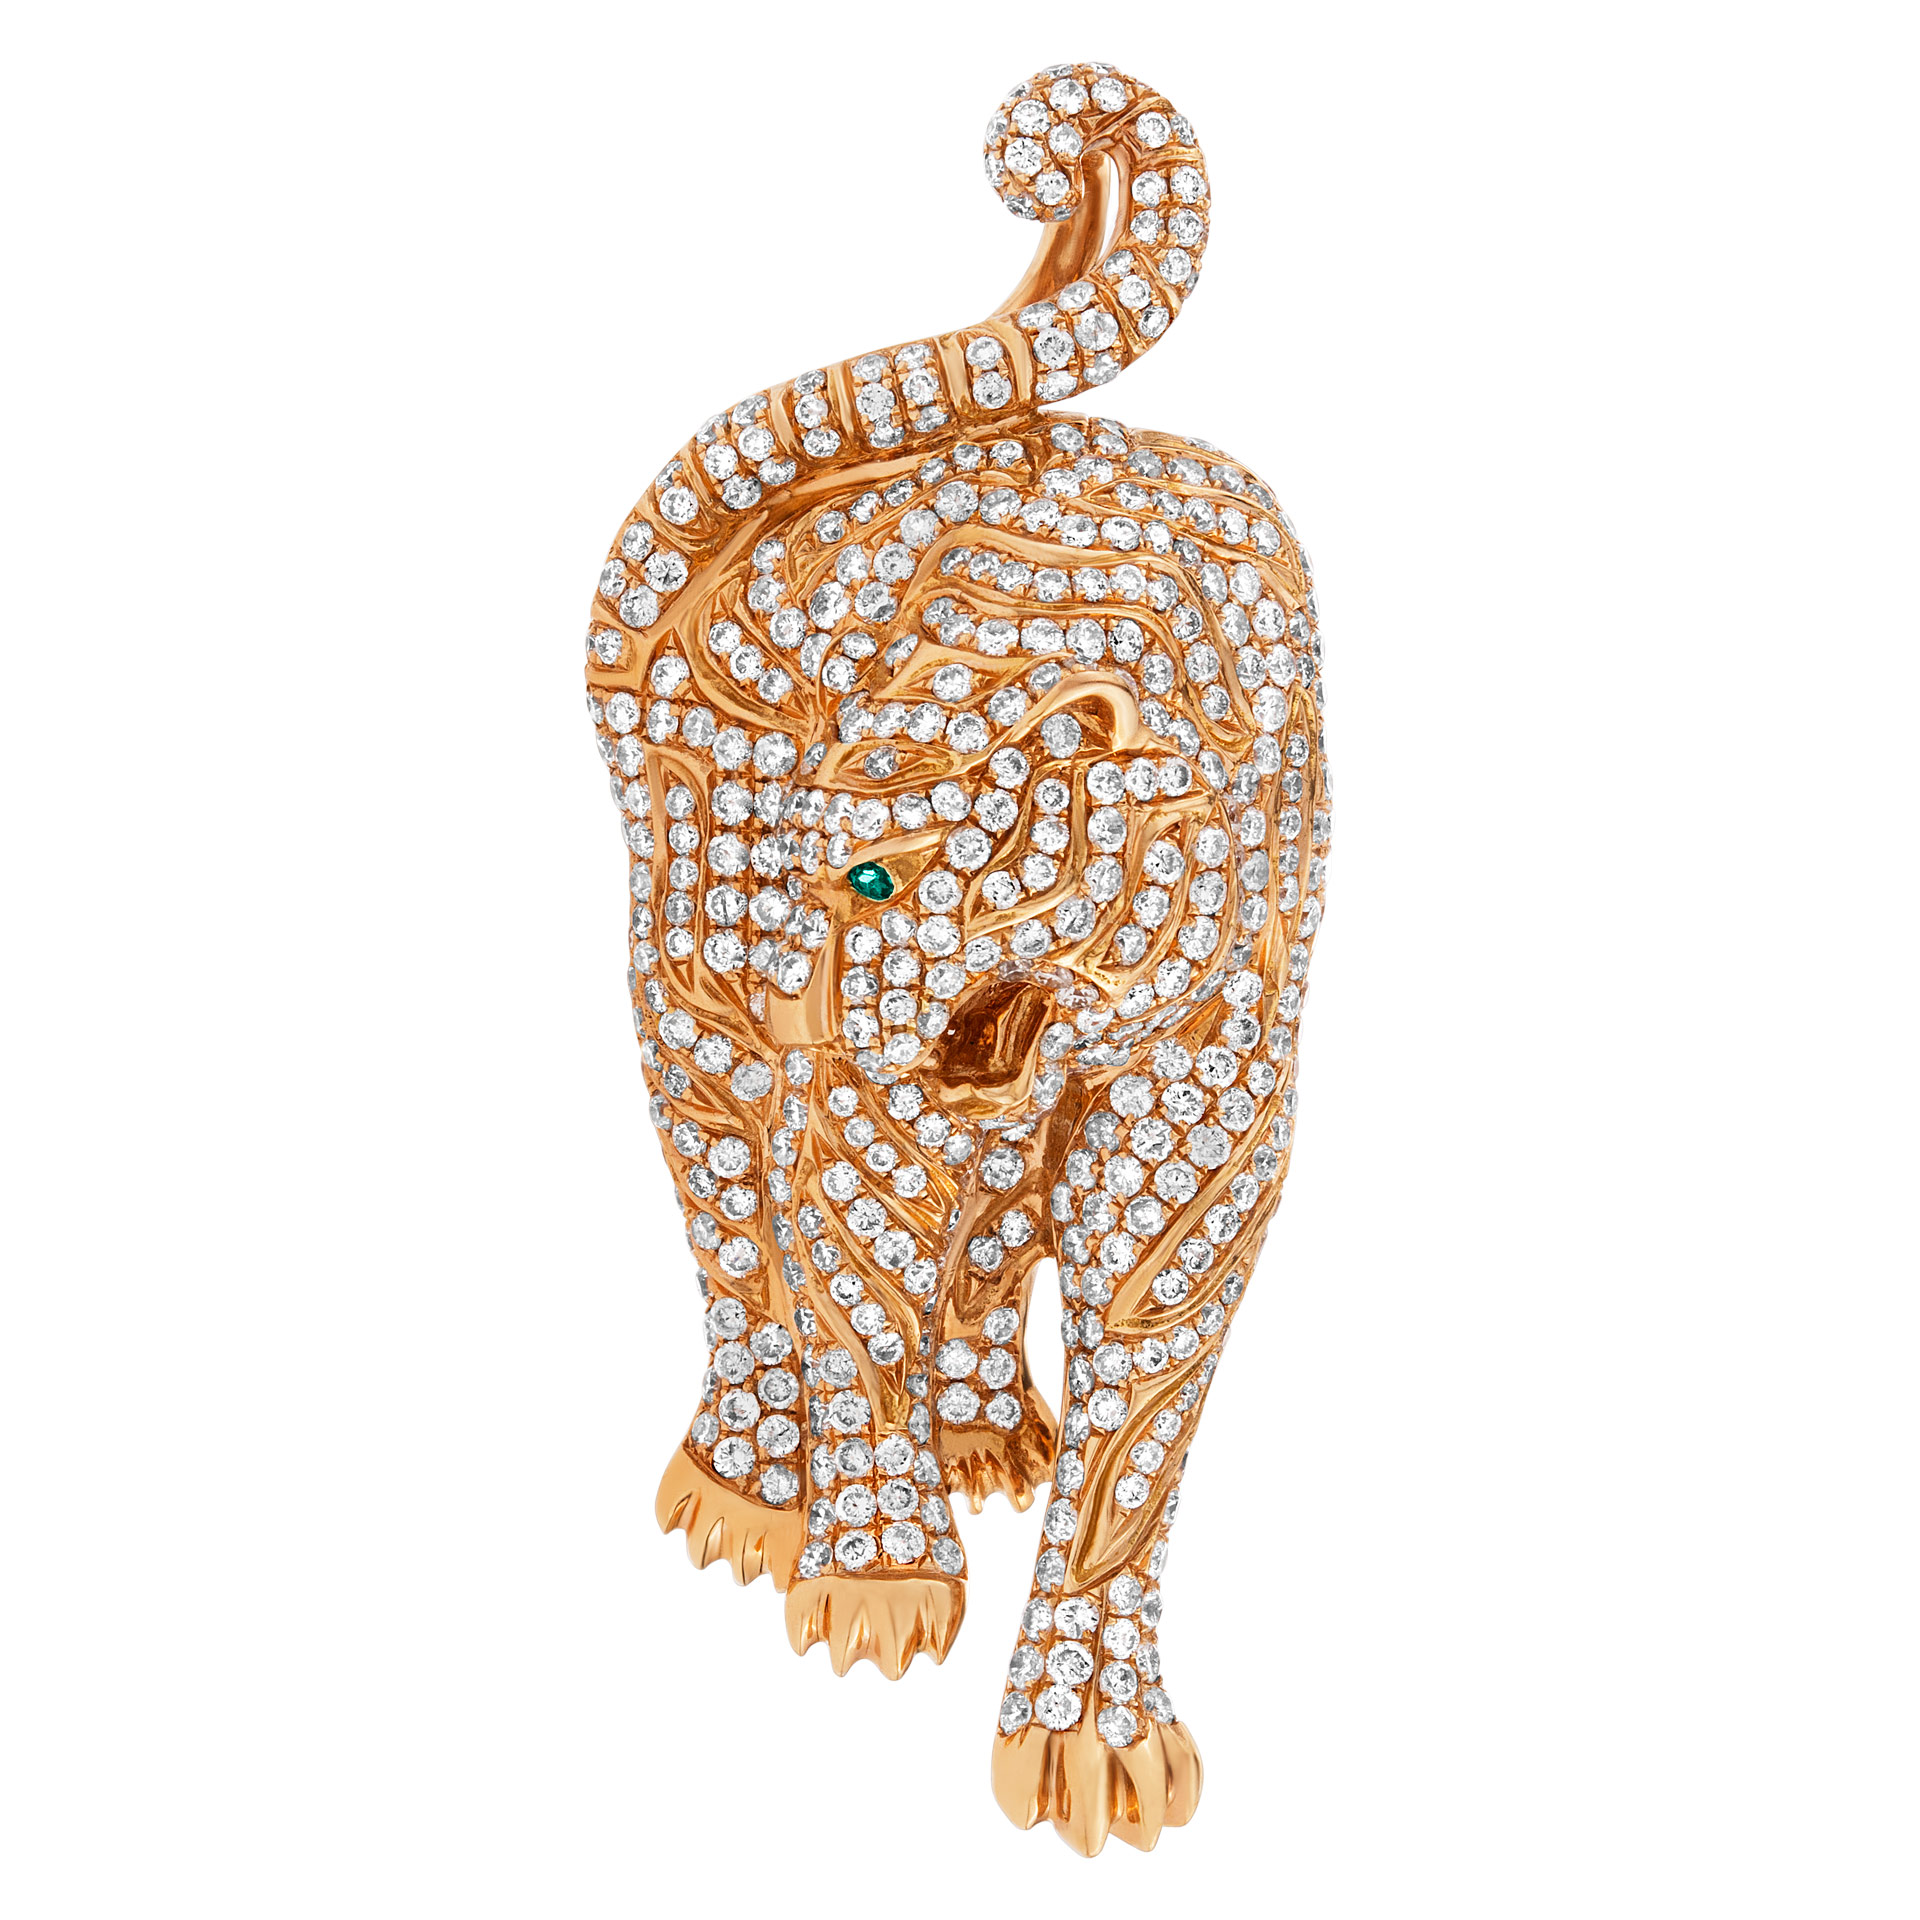 Opulent Tiger pendant in 18K rose gold and diamonds. 4.98 carats in diamonds